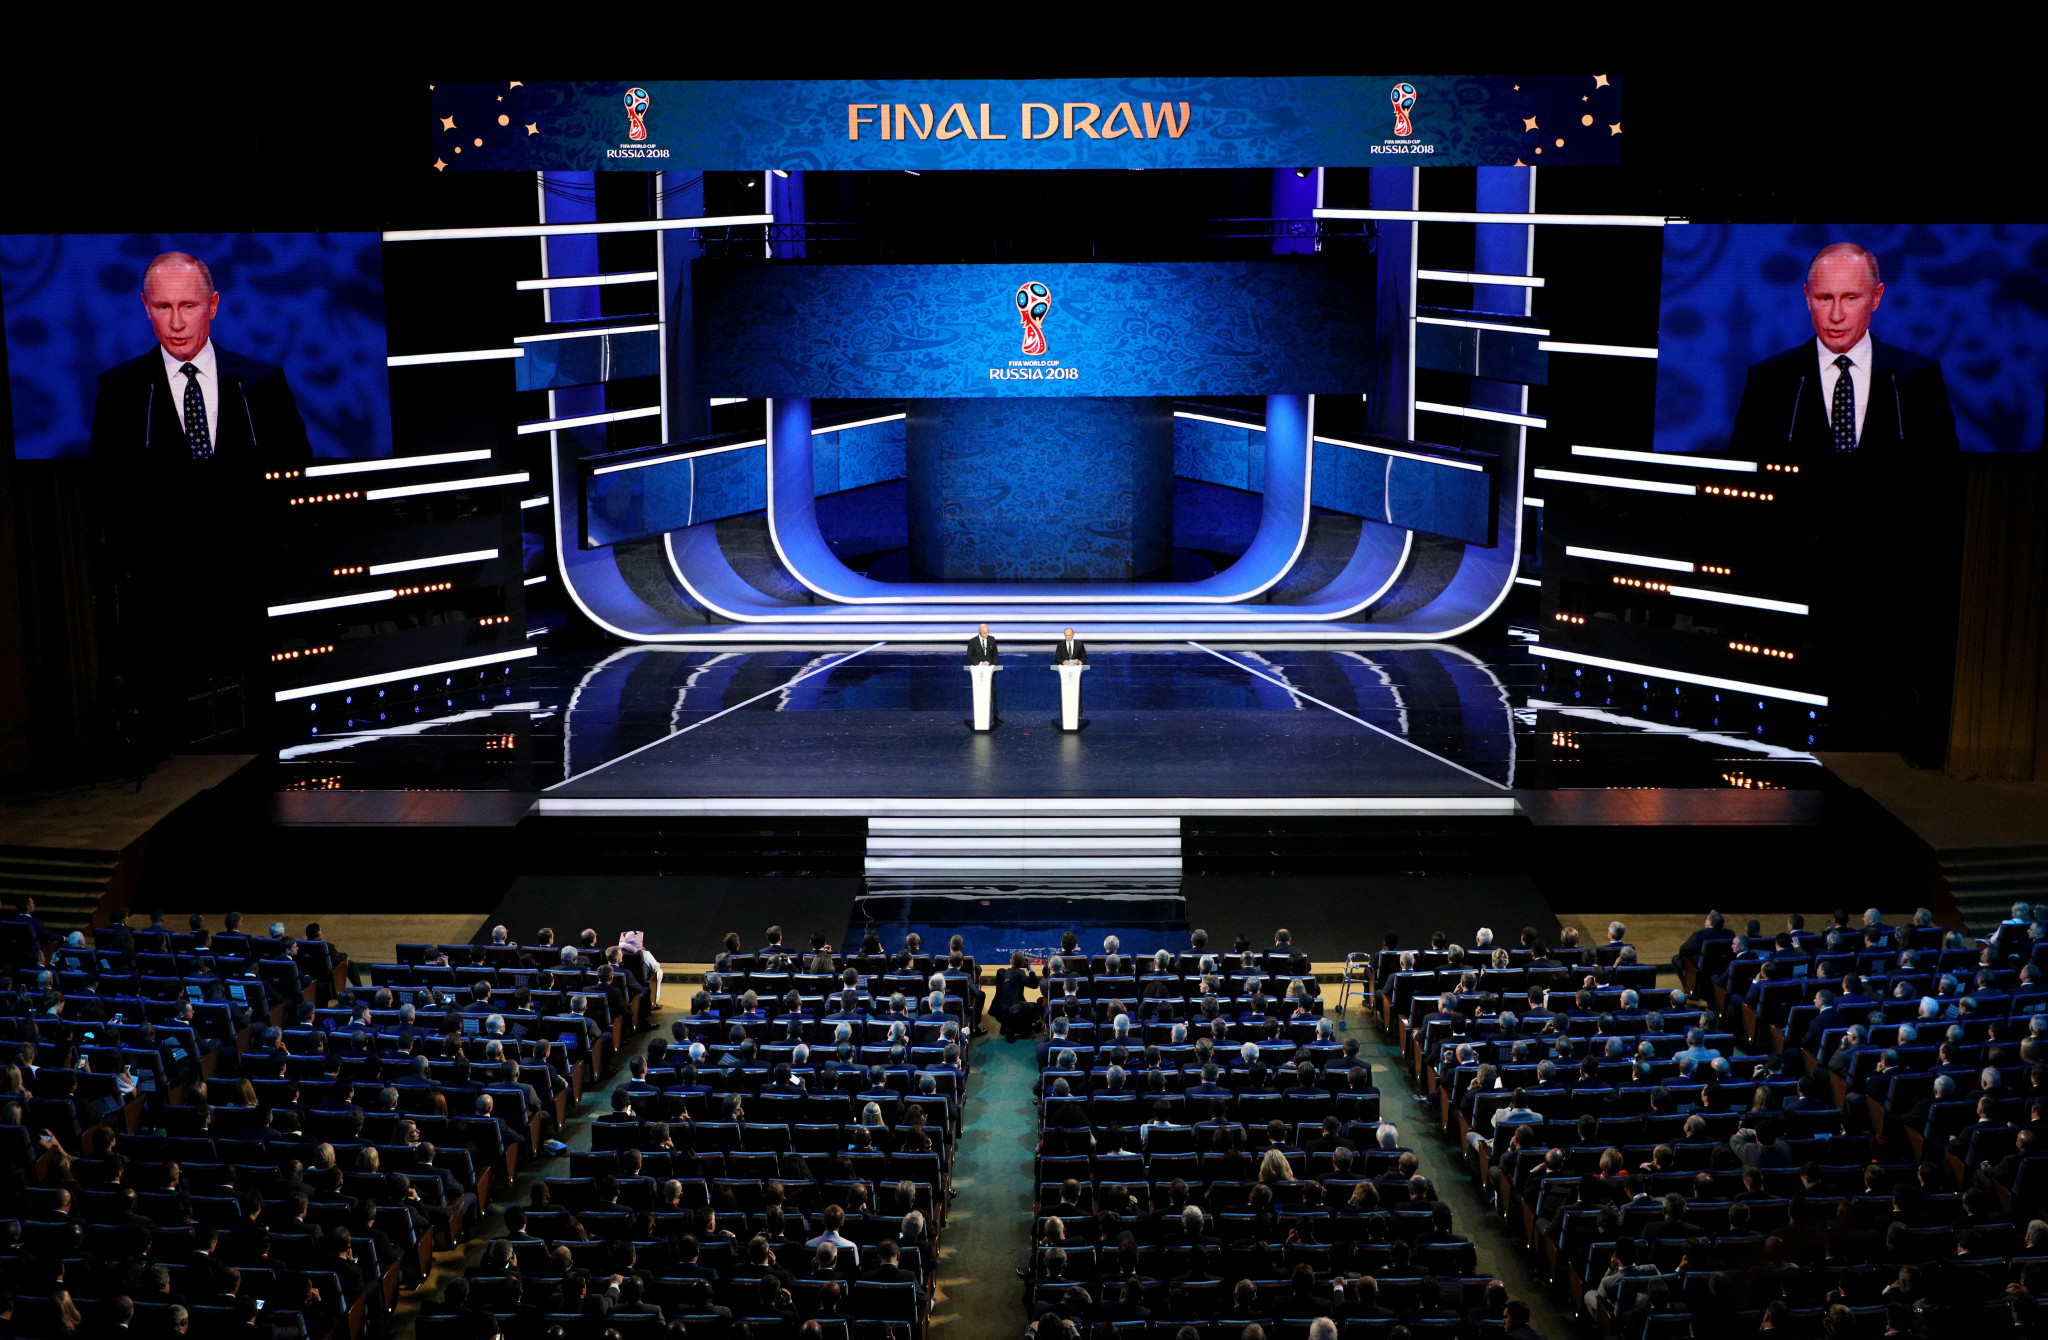 Vladimir Putin star guest as draw made for 2018 FIFA World Cup 